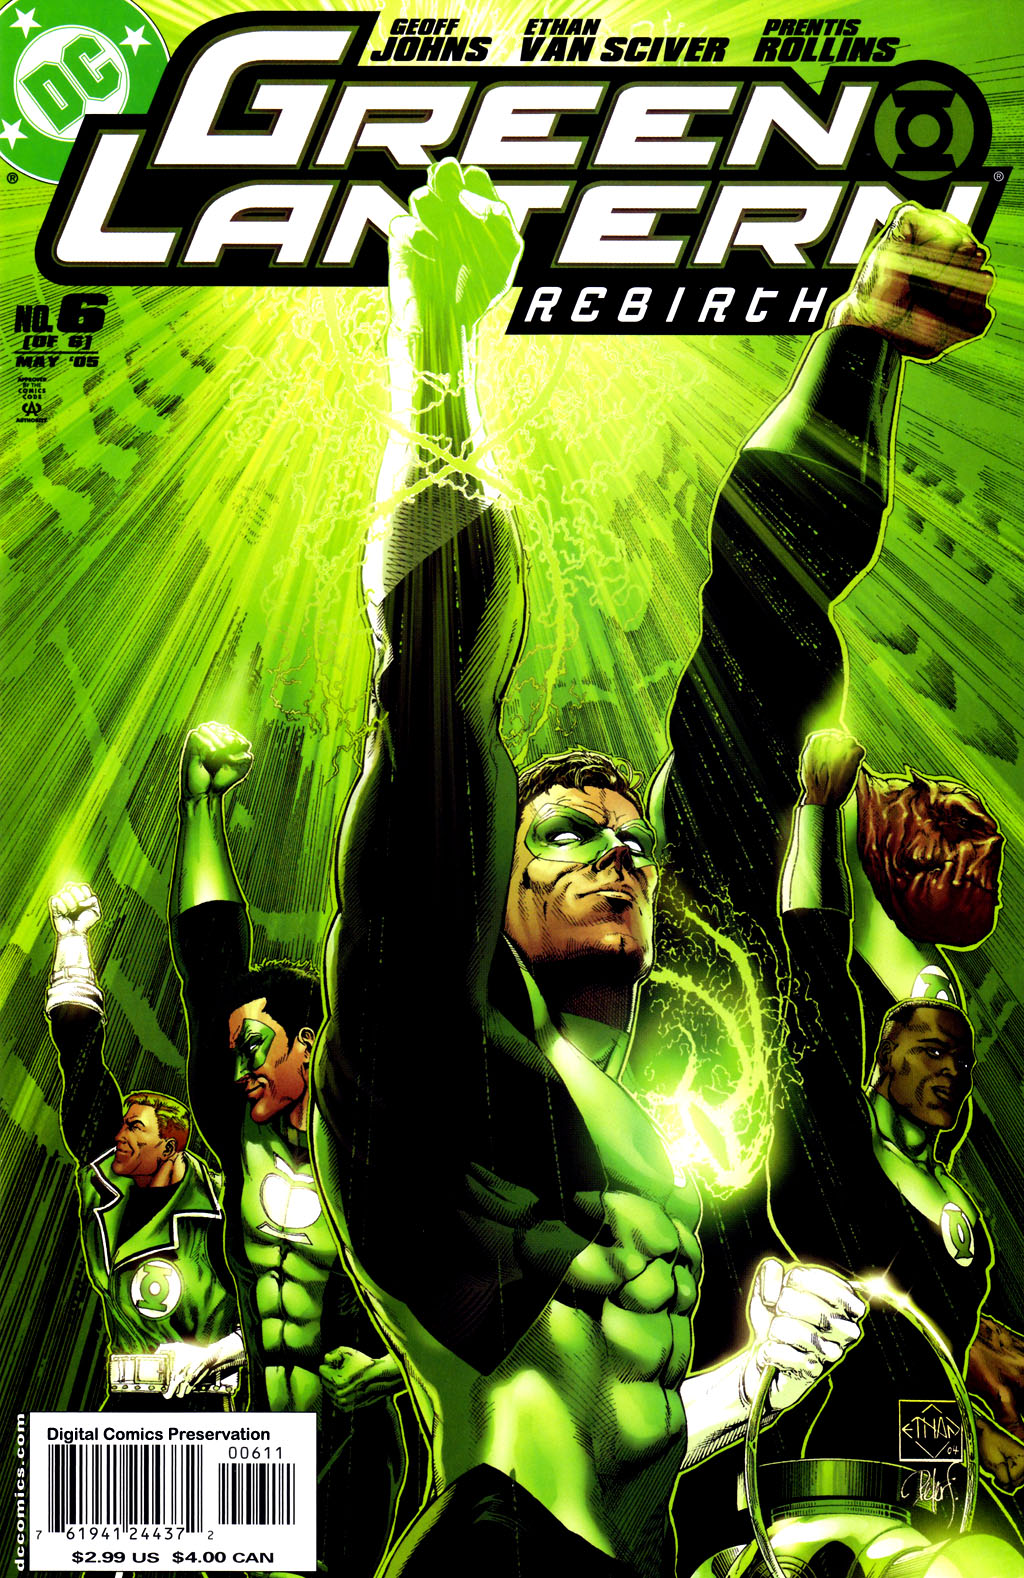 Rebirth 06 (of 06) (2005) (Team-DCP)